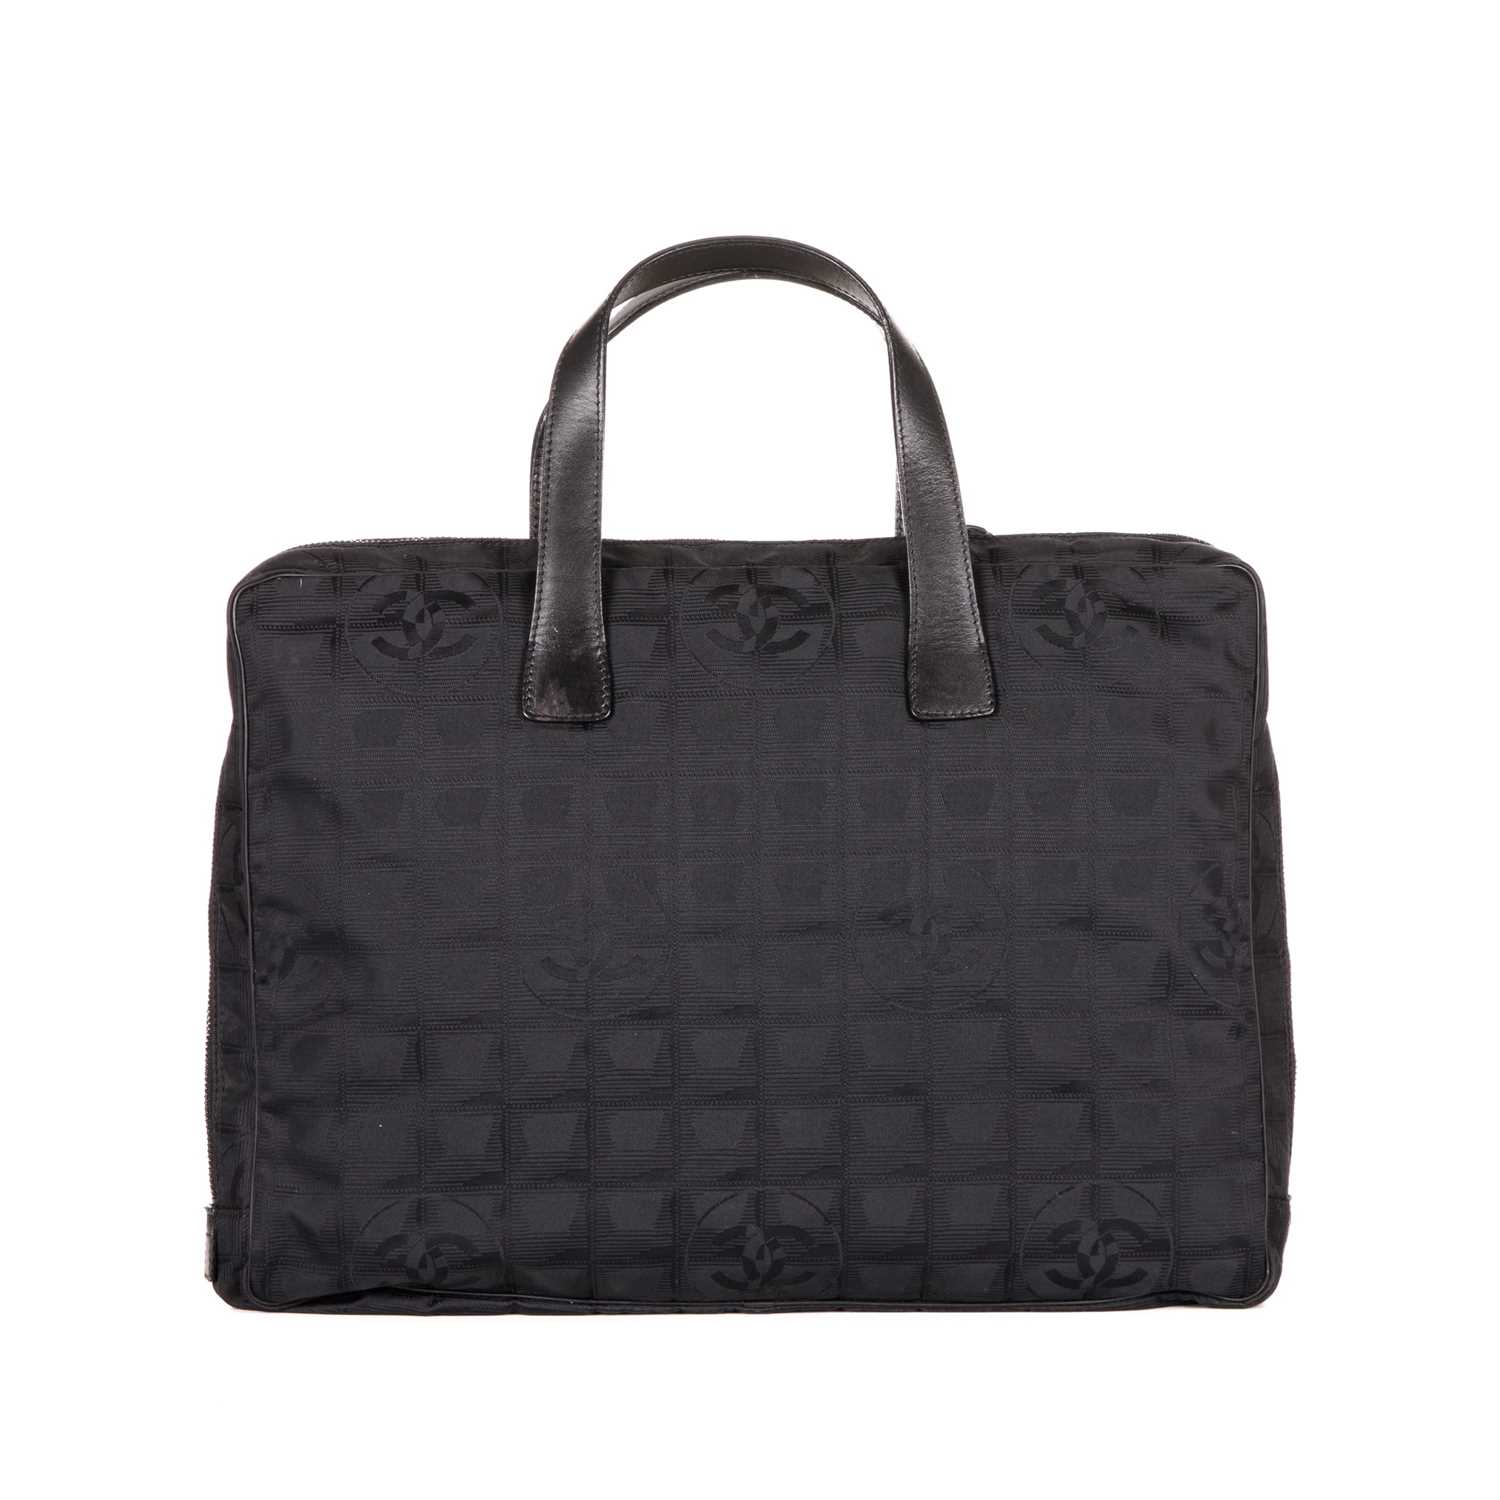 Chanel, a Travel Line briefcase, featuring a black nylon exterior, with flat black leather